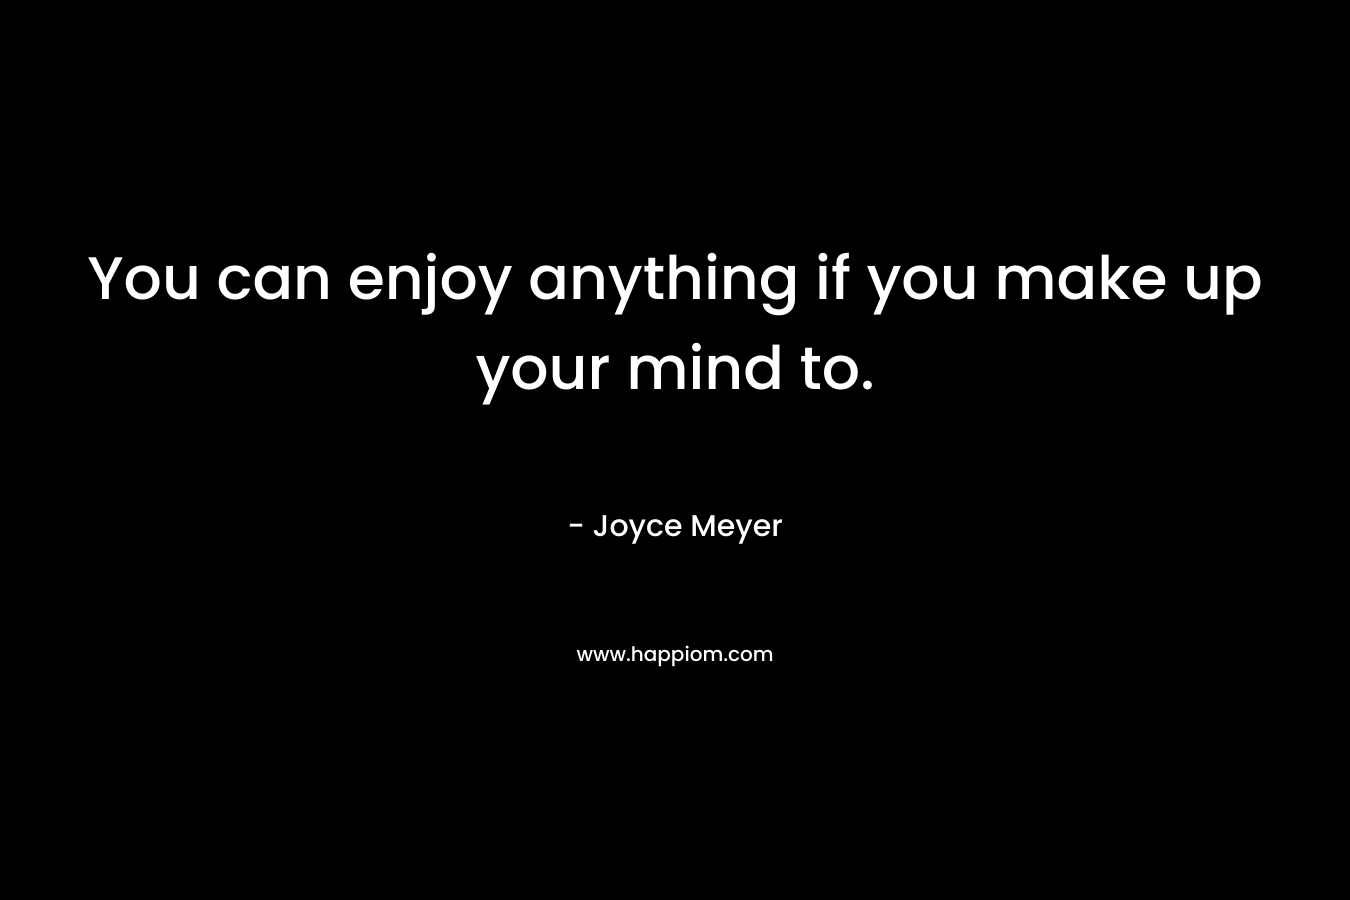 You can enjoy anything if you make up your mind to. – Joyce Meyer